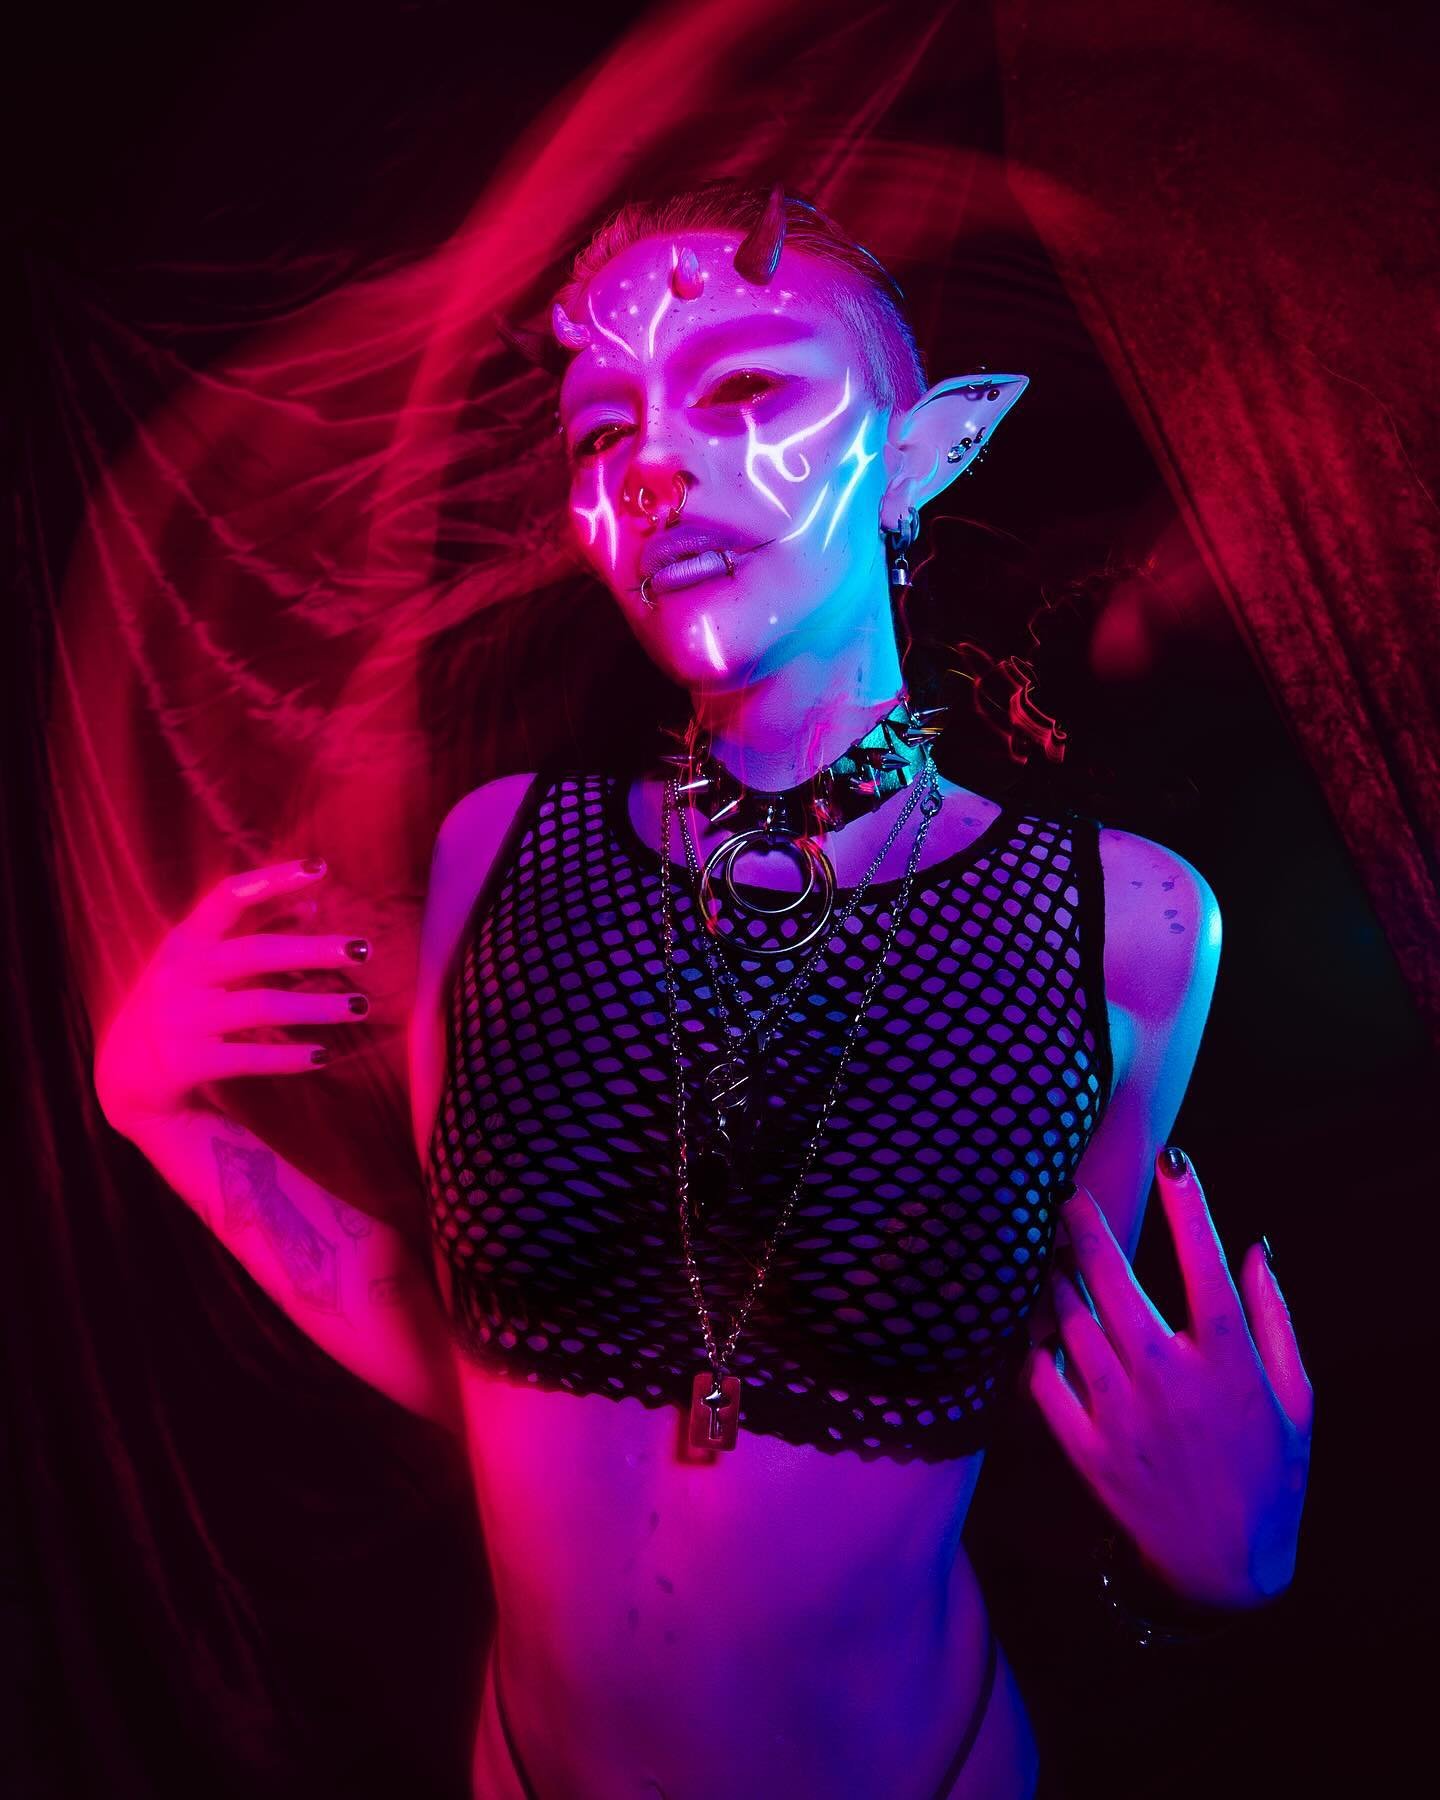 Bringing in the red added such a cool dimension to these photos!

I would love to do more wacky projects like this, I love a really well put together concept!!

If you want help bringing your vision to life and you like bold and abstract colour, I mi